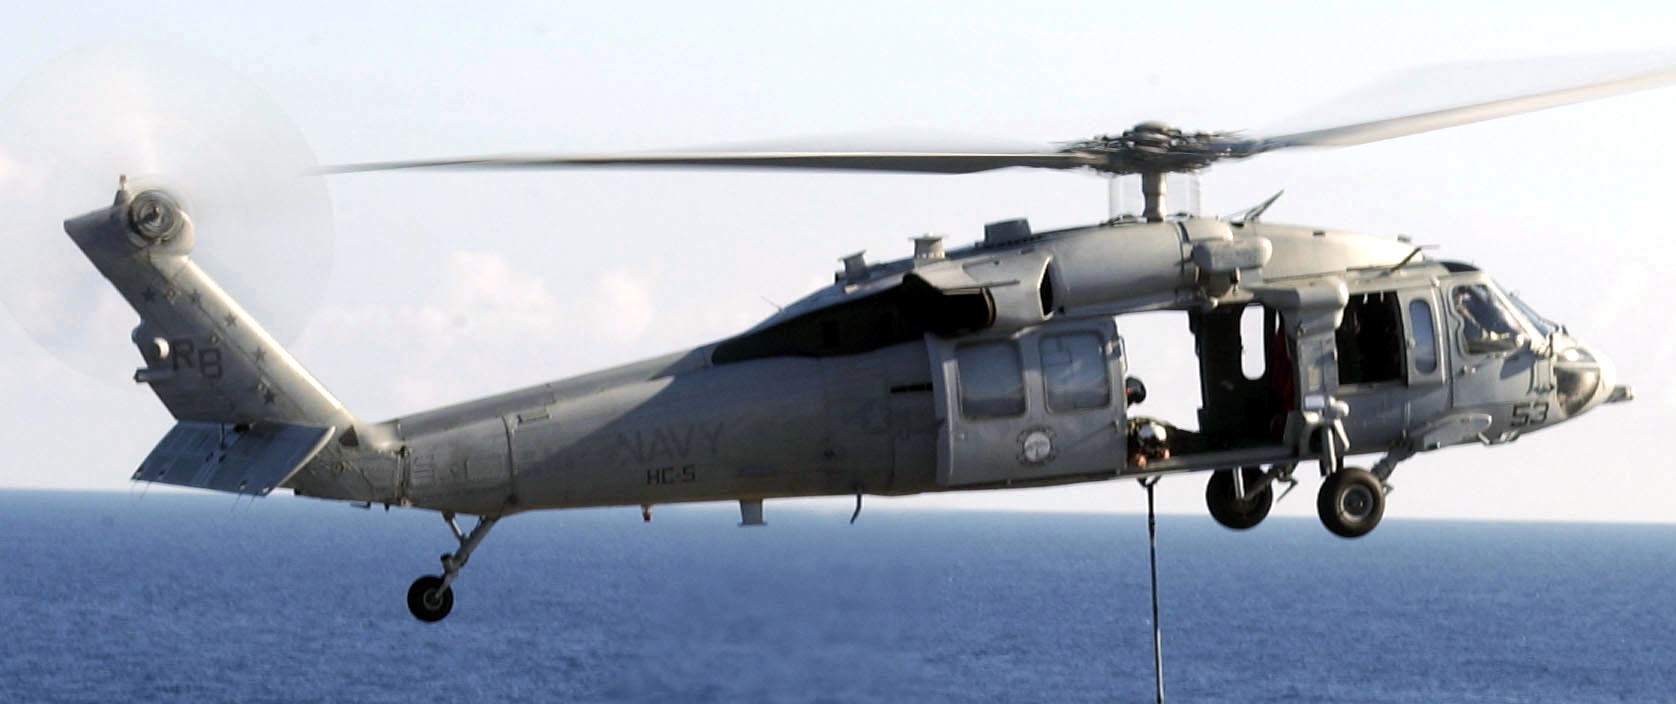 hc-5 providers helicopter combat support squadron navy mh-60s seahawk 78